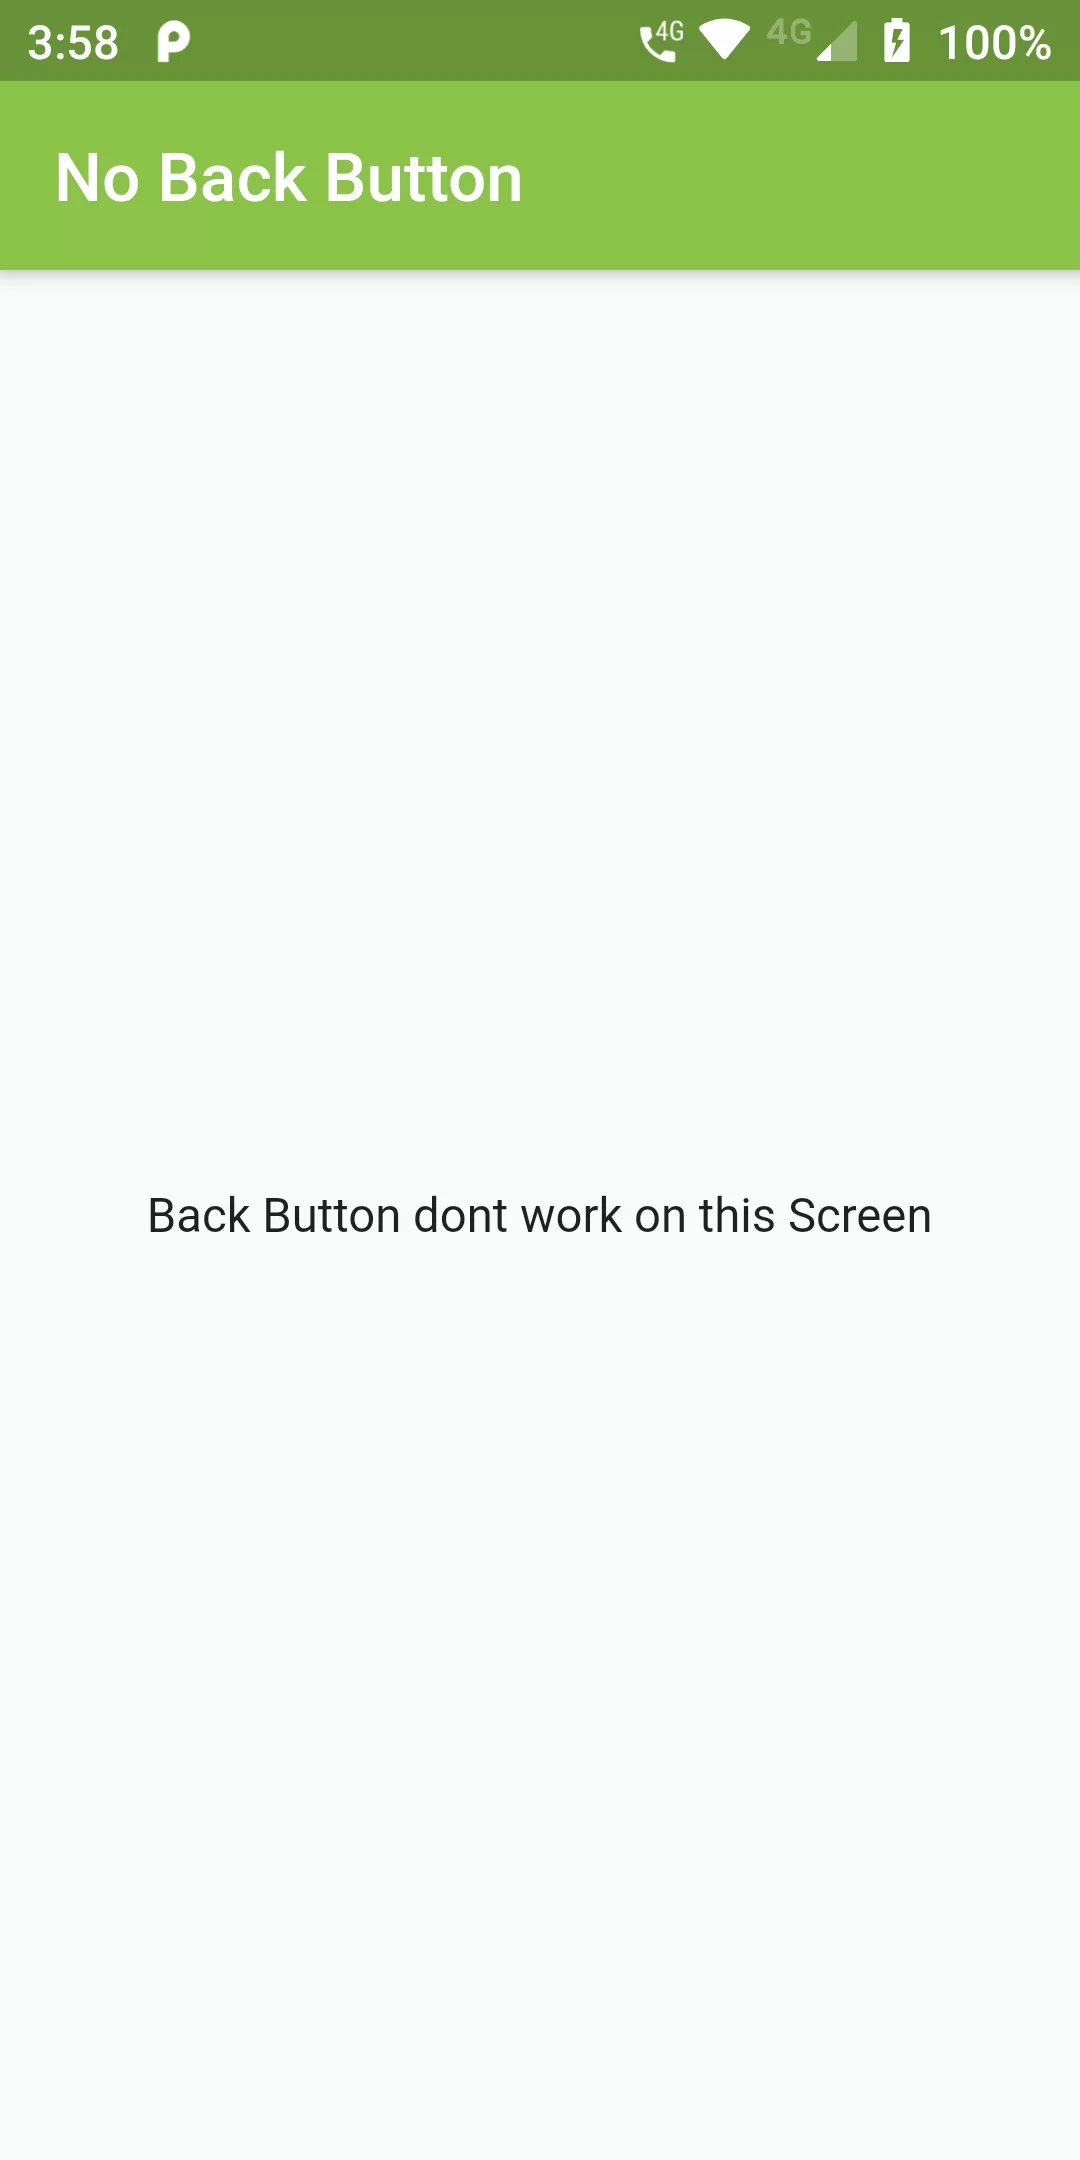 How To Disable Or Override Back Button Using Flutter App